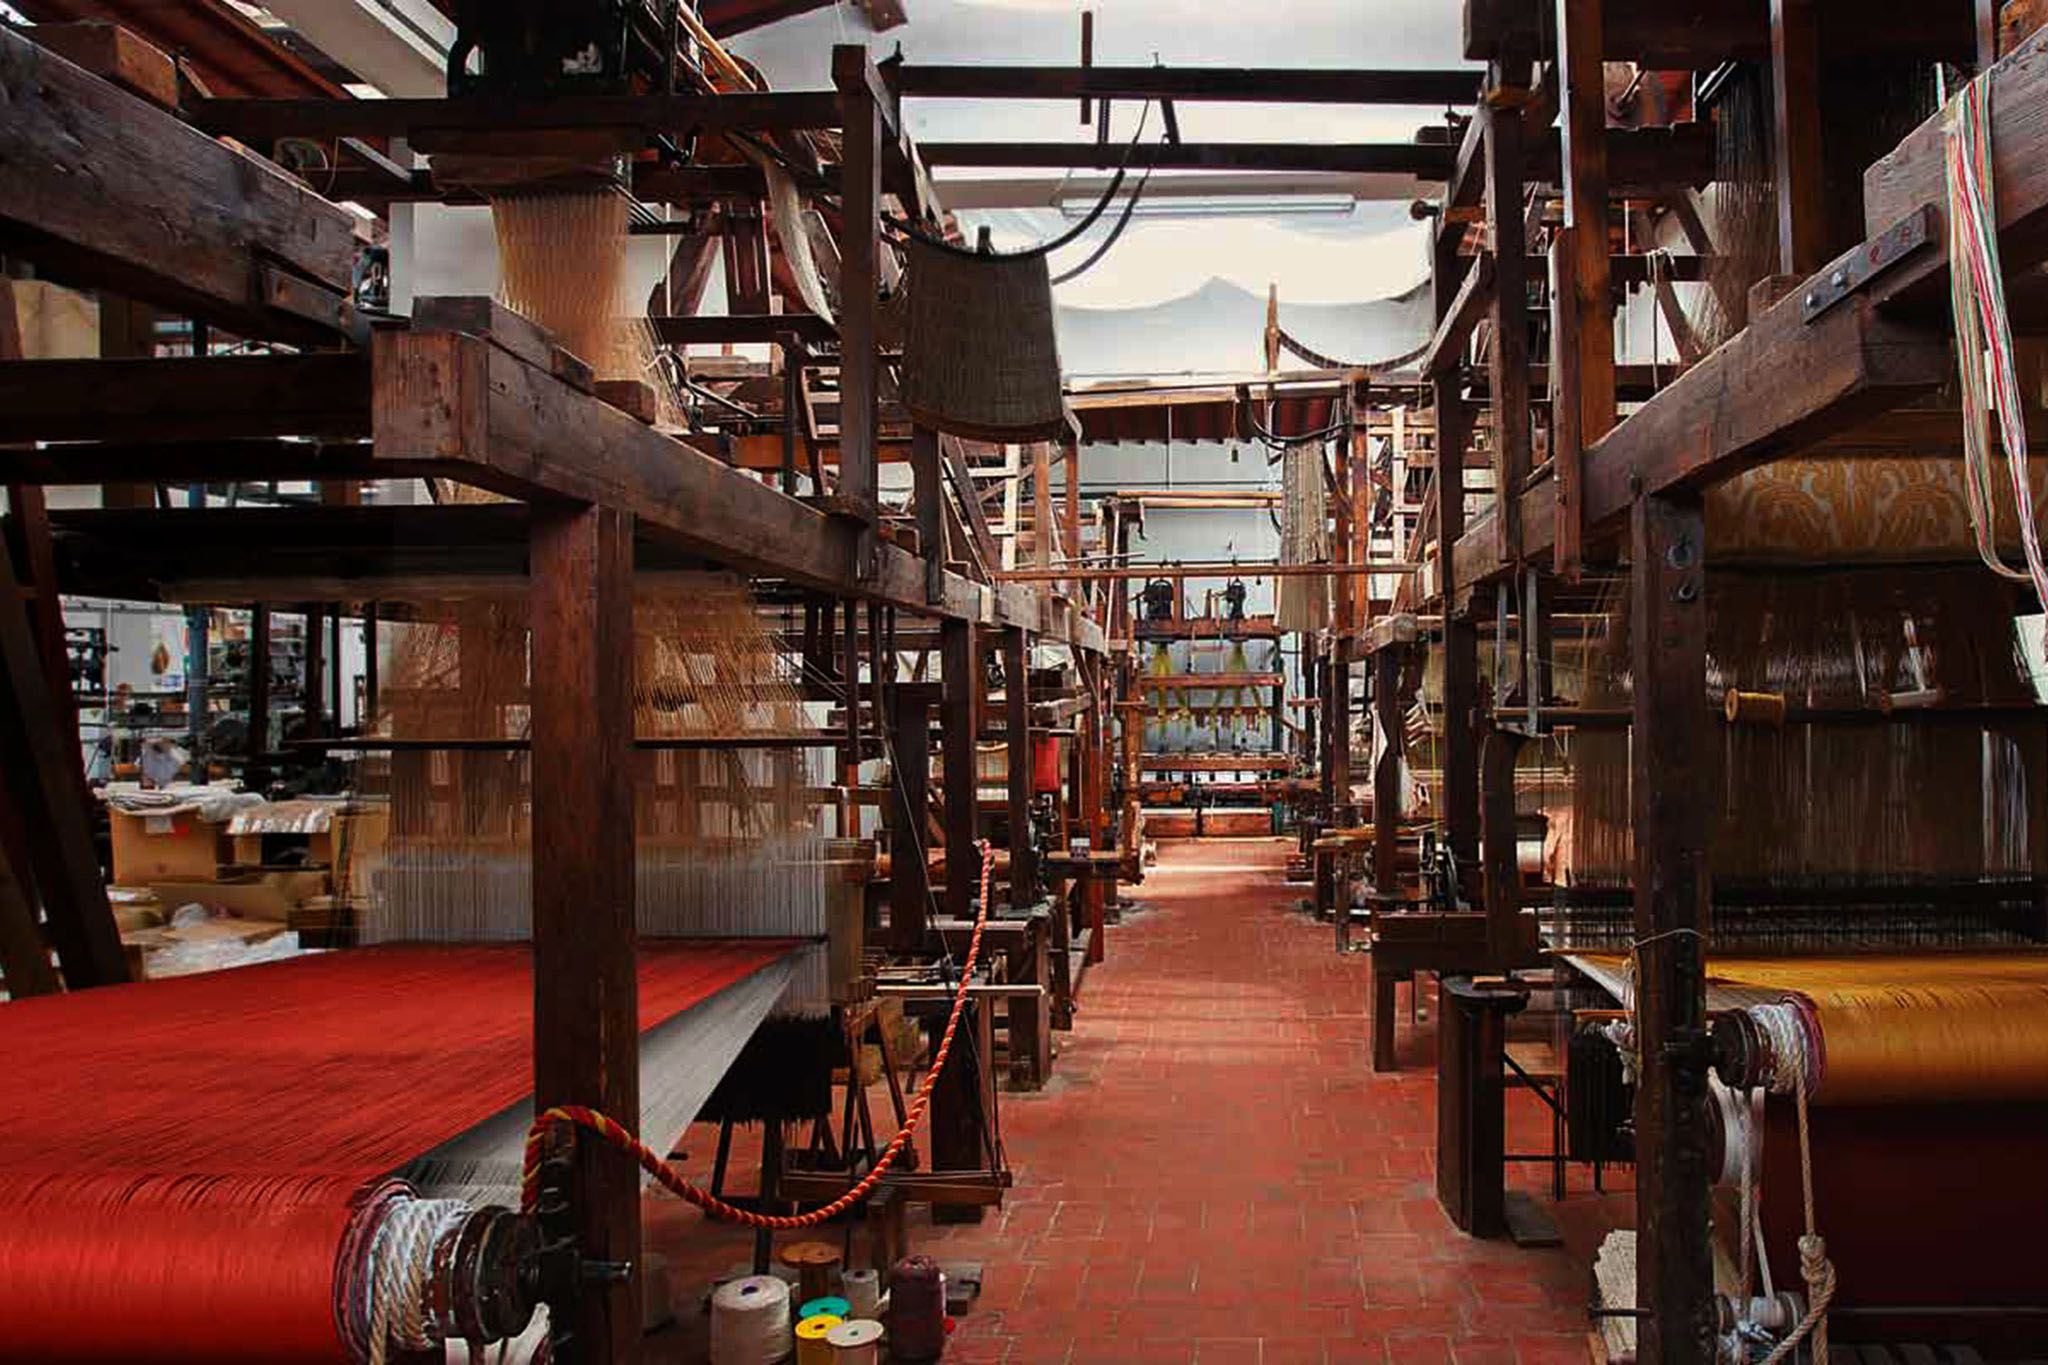 Ancient looms still producing excellent cloth in Florence.